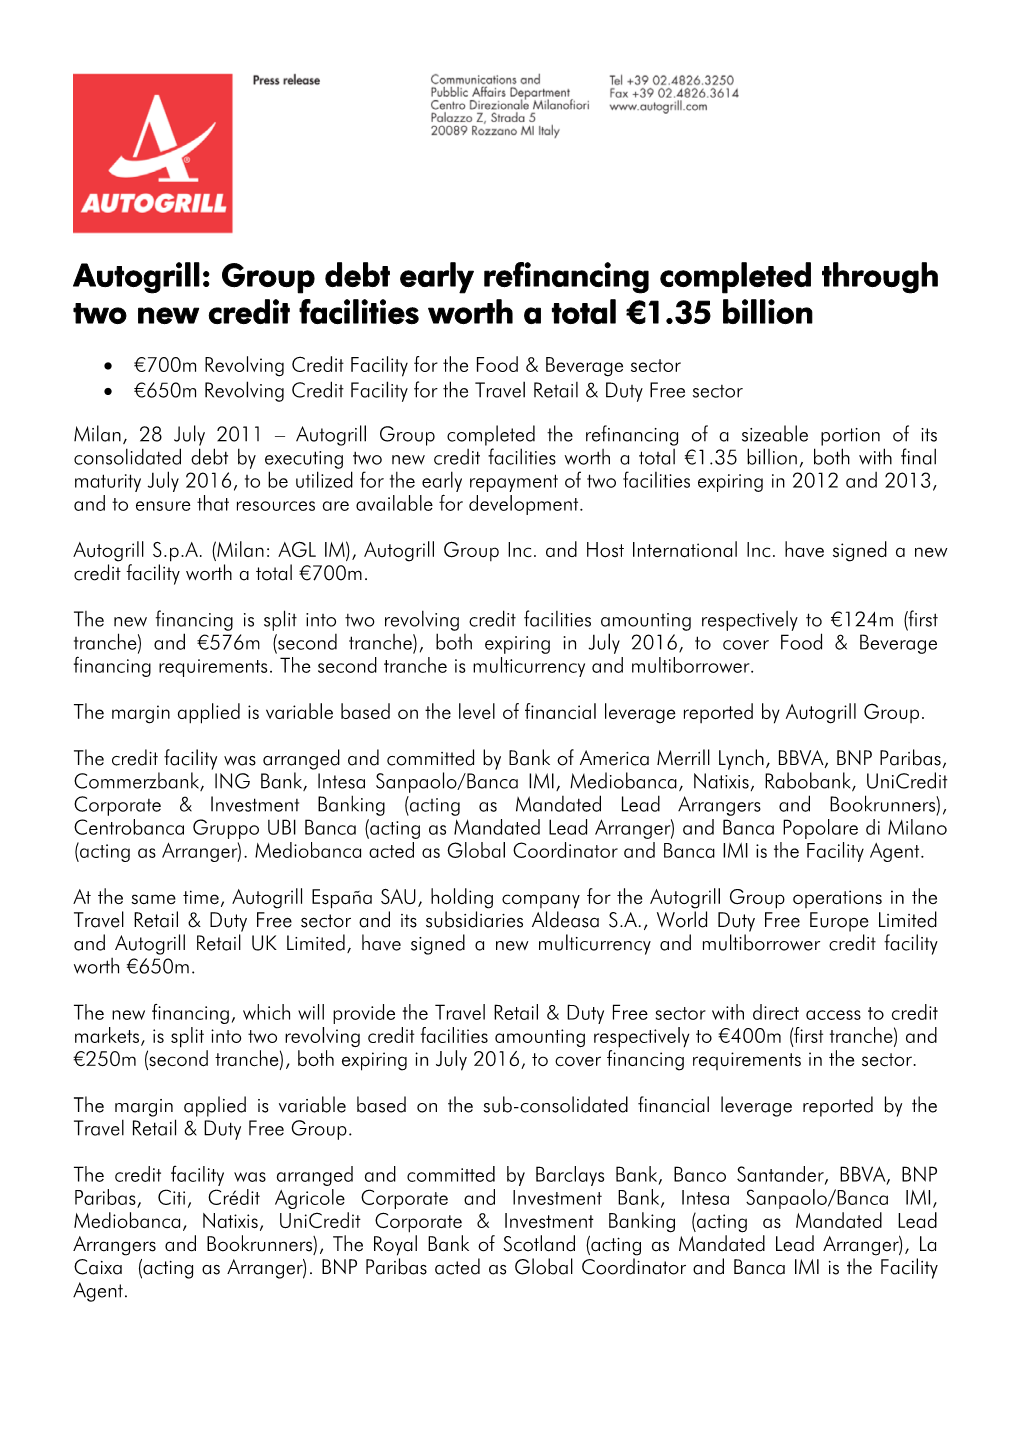 Group Debt Early Refinancing Completed Through Two New Credit Facilities Worth a Total €1.35 Billion